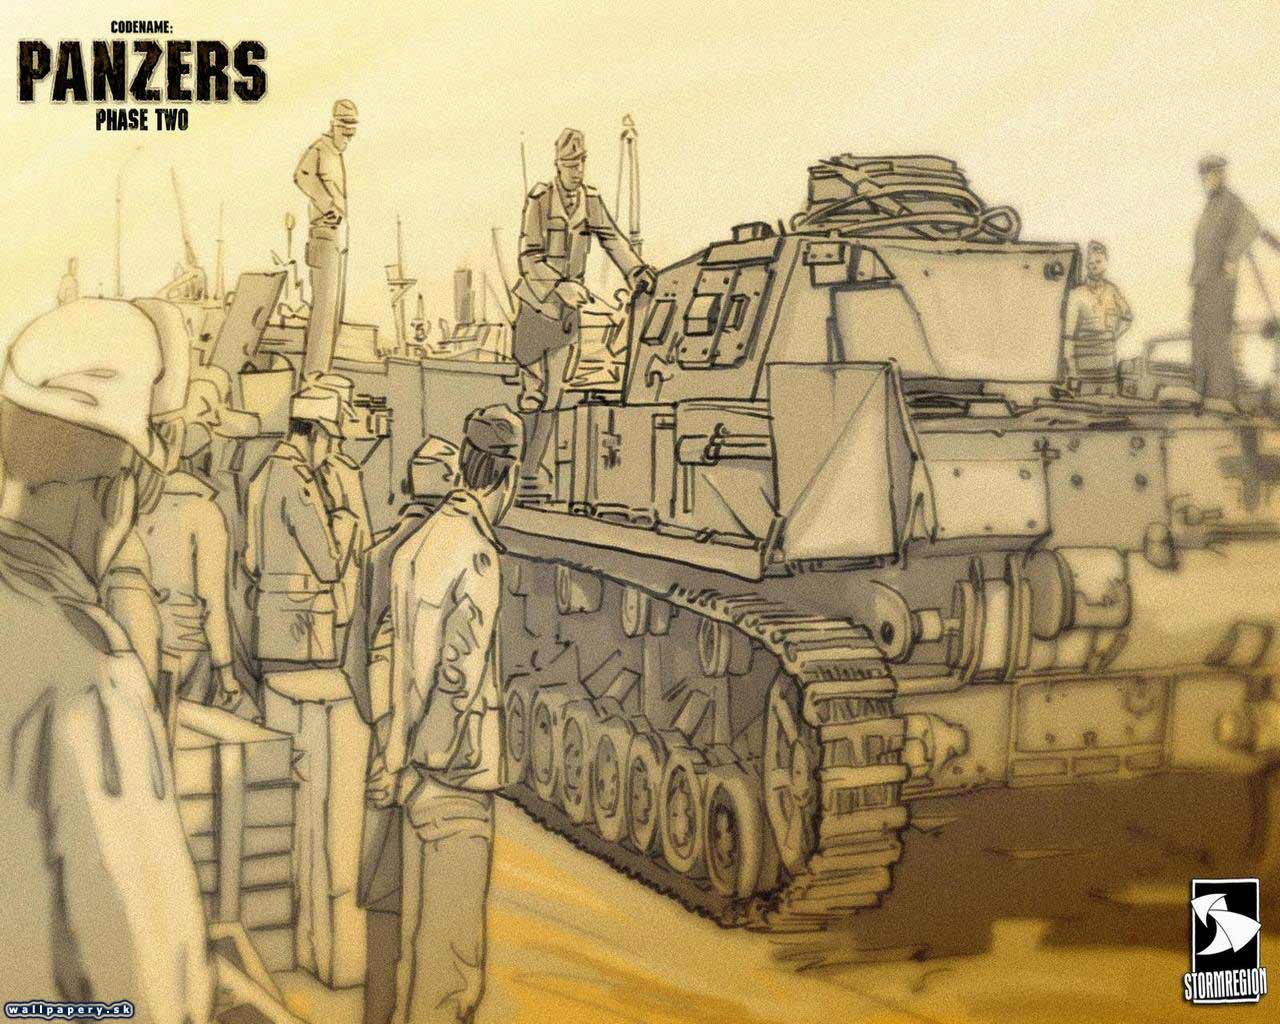 Codename: Panzers Phase Two - wallpaper 6